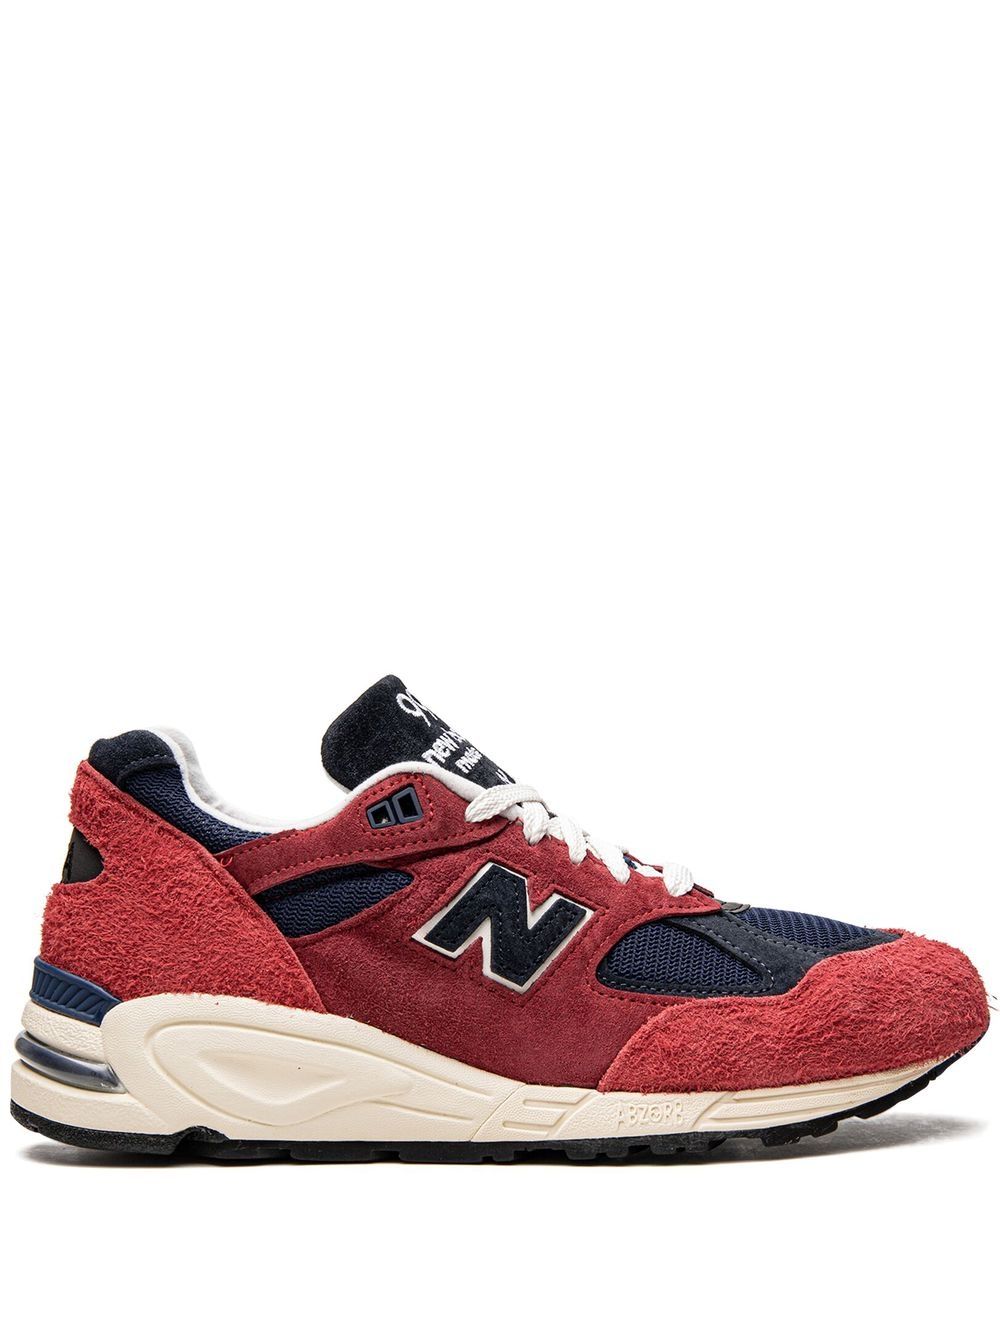 New Balance MADE in USA 990v2 sneakers - Red